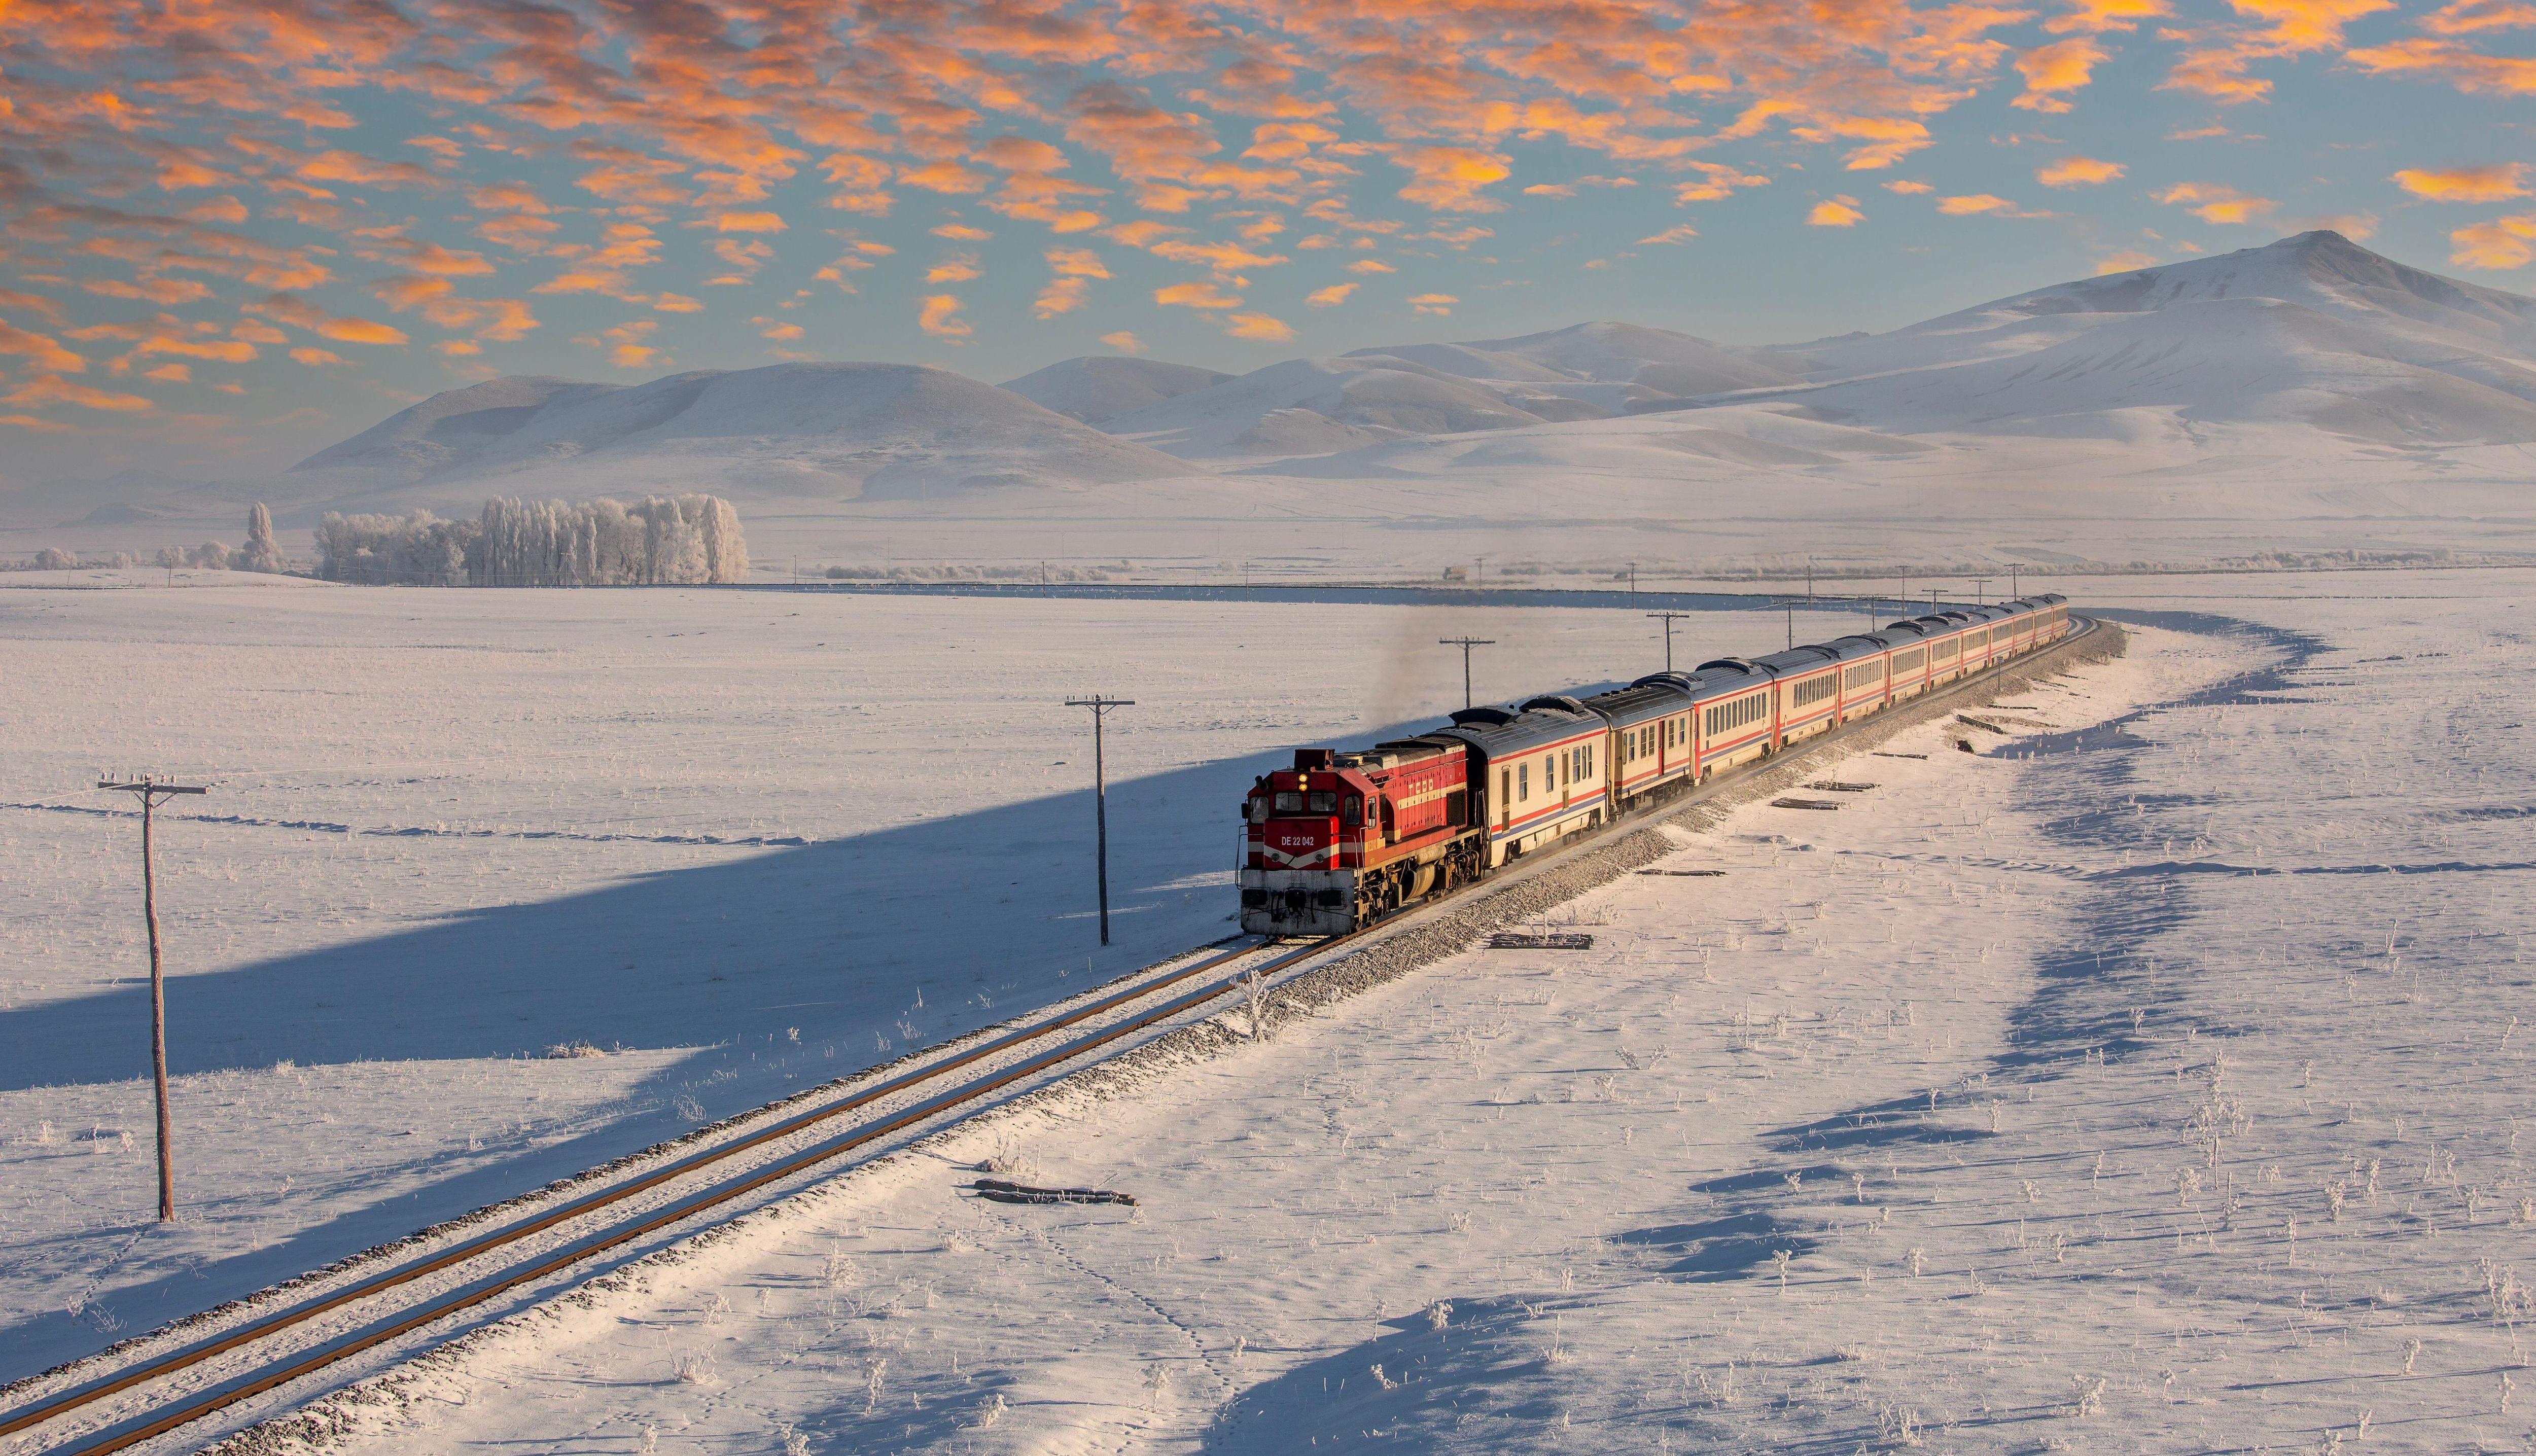 The Eastern Express in Kars